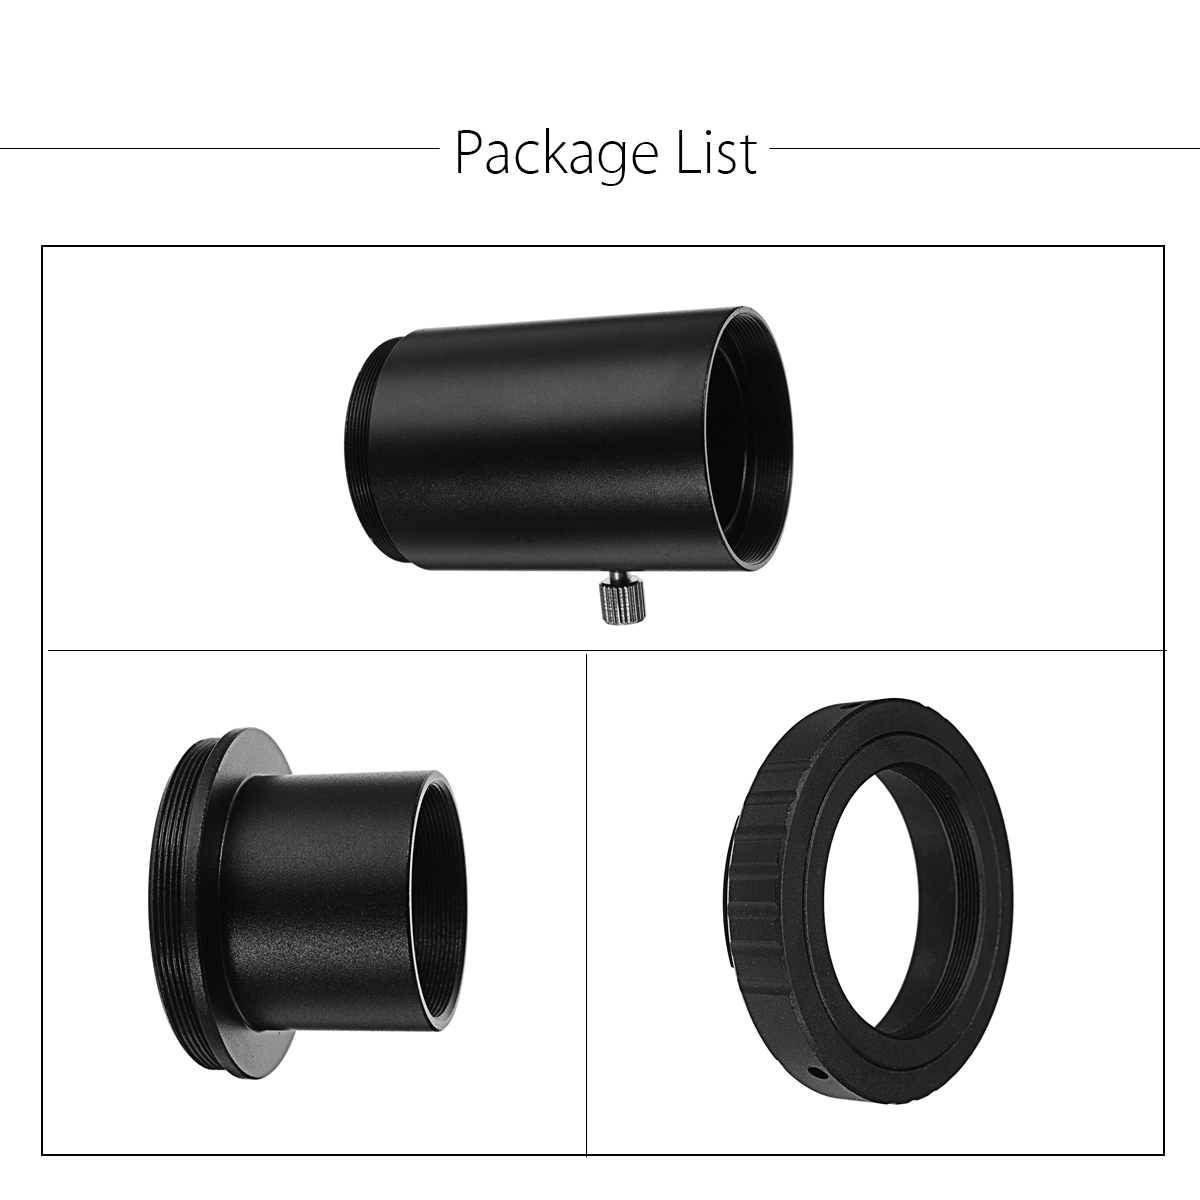 125inch-Black-Extension-Tube-And-Astronomical-Telescope-Mount-Adapter-For-Canon-Camera-1337723